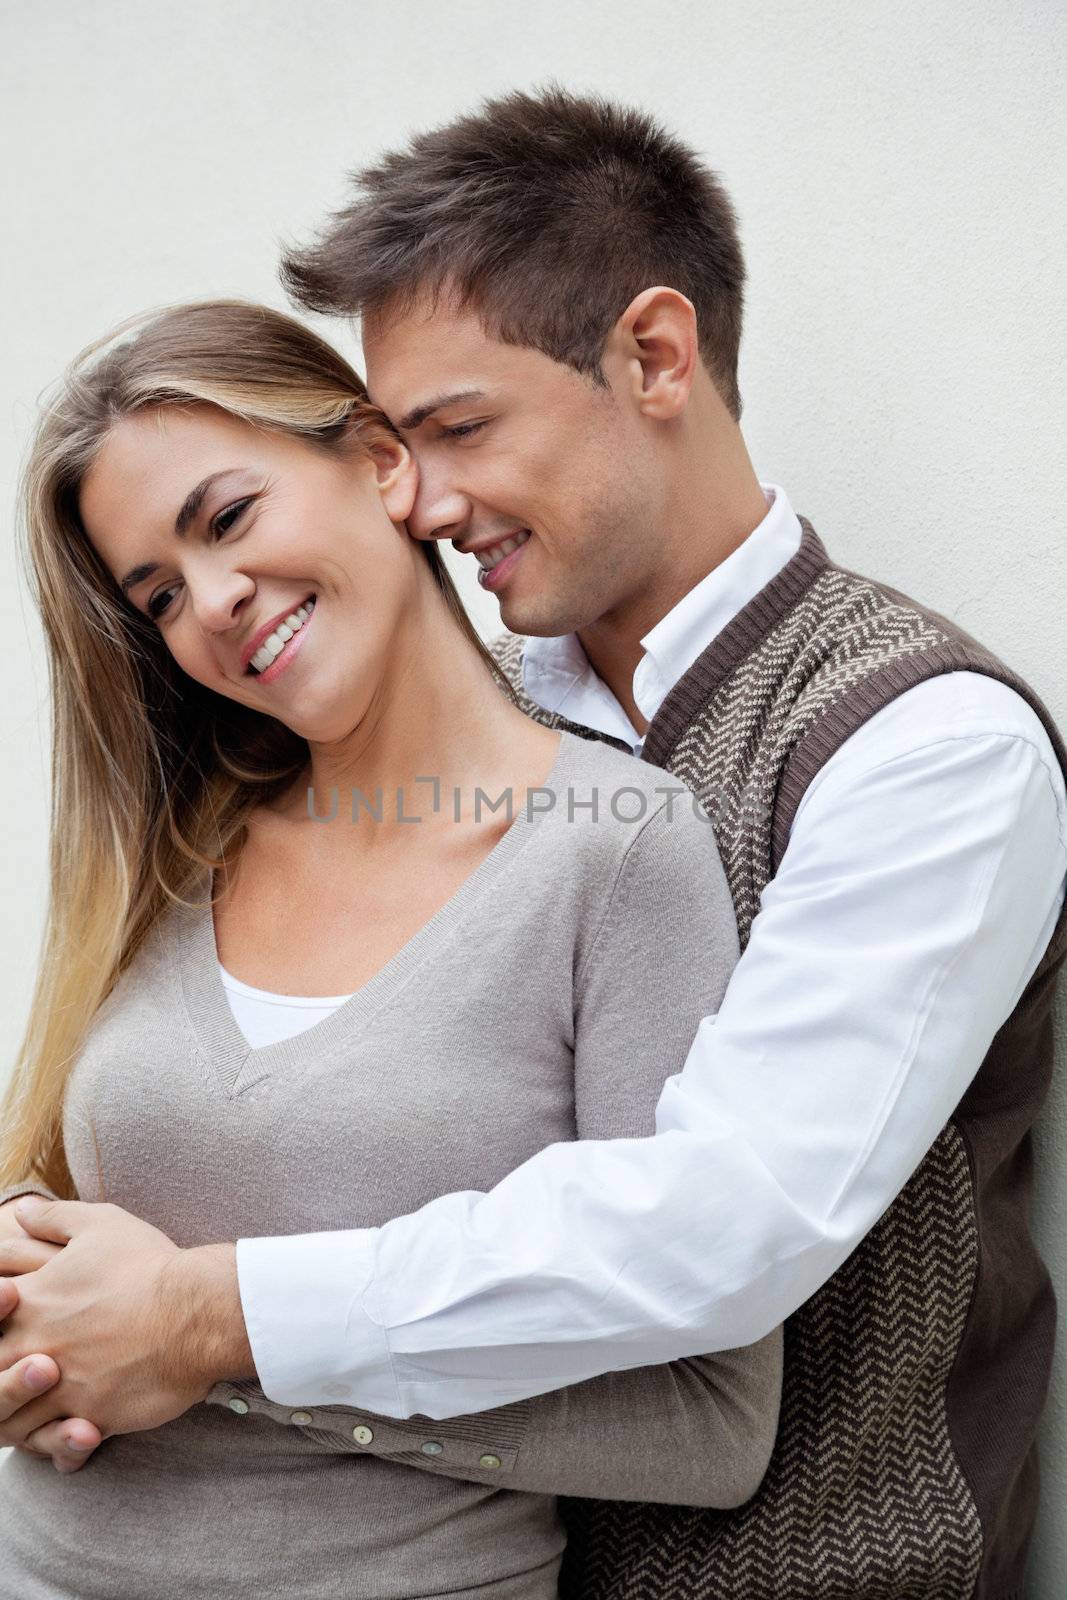 Young Man Embracing Woman by leaf